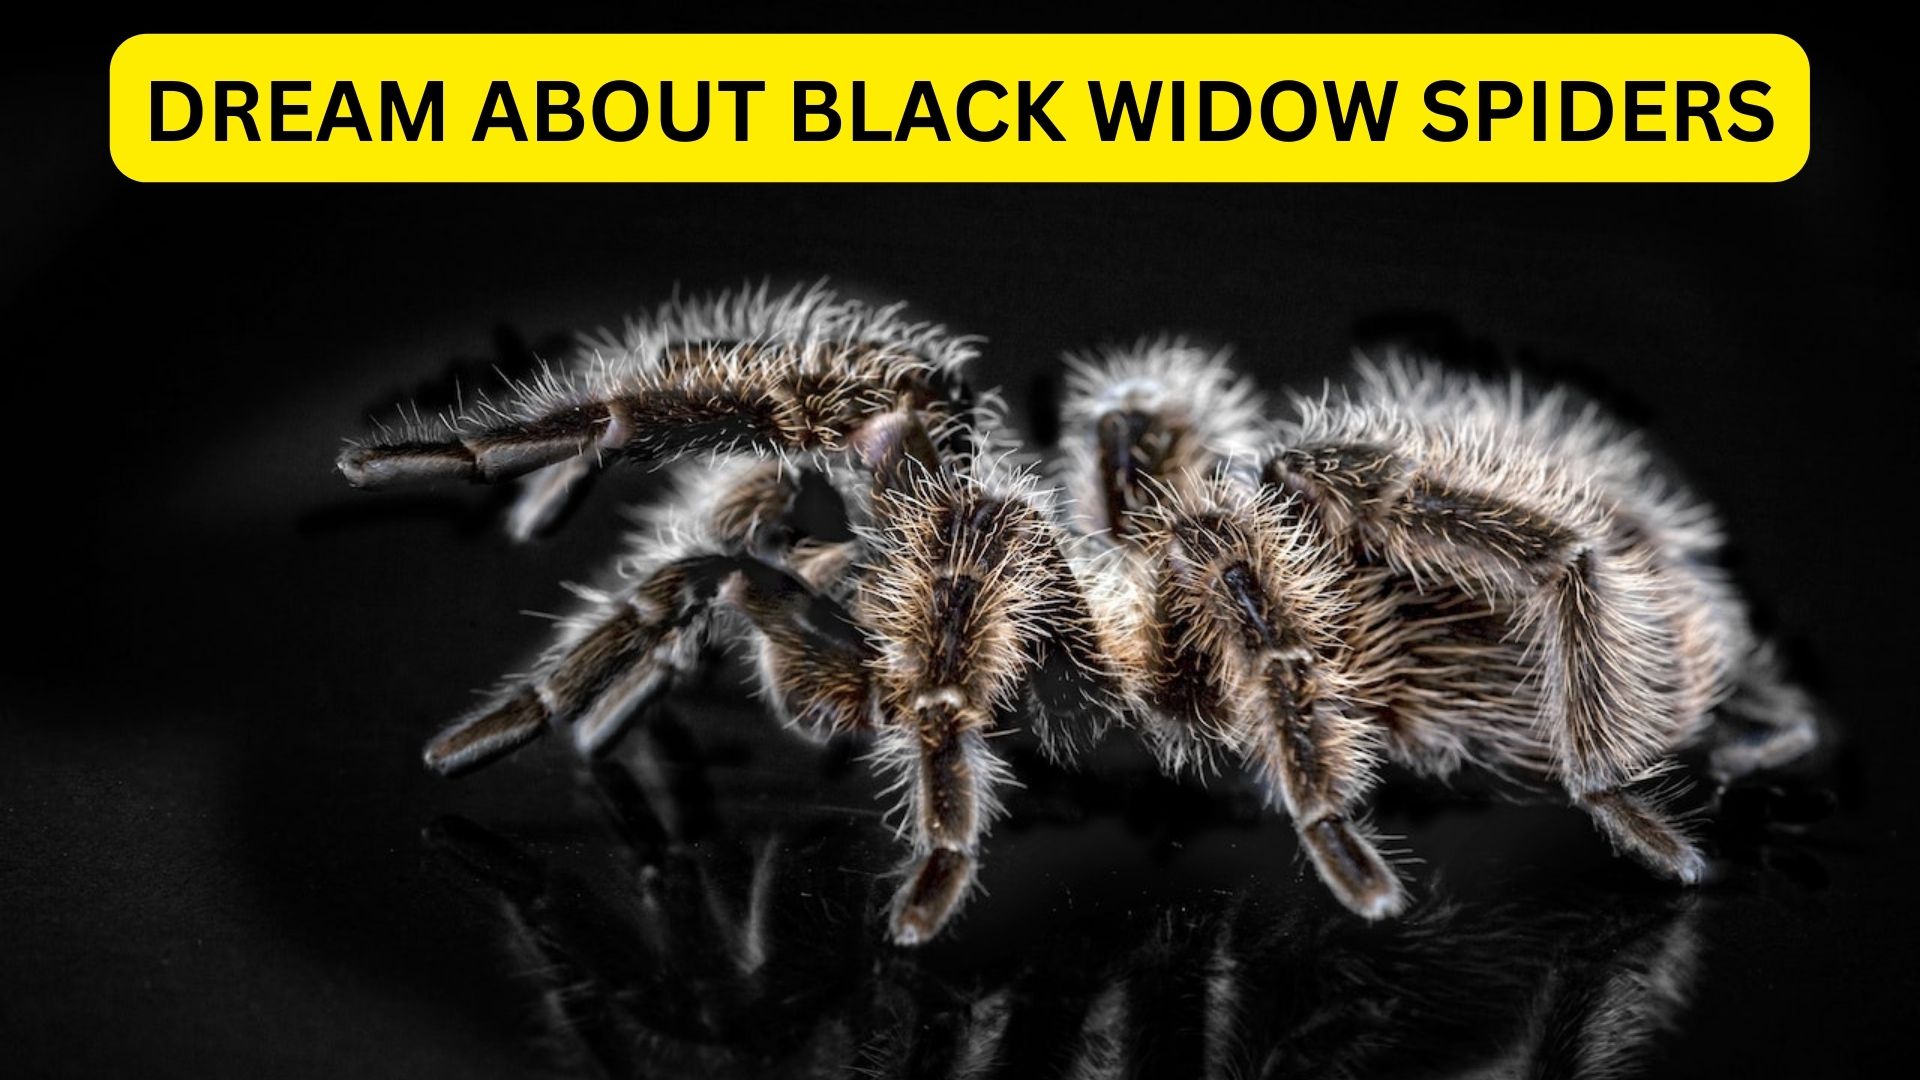  Dream About Black Widow Spiders - A Poisonous Relationship